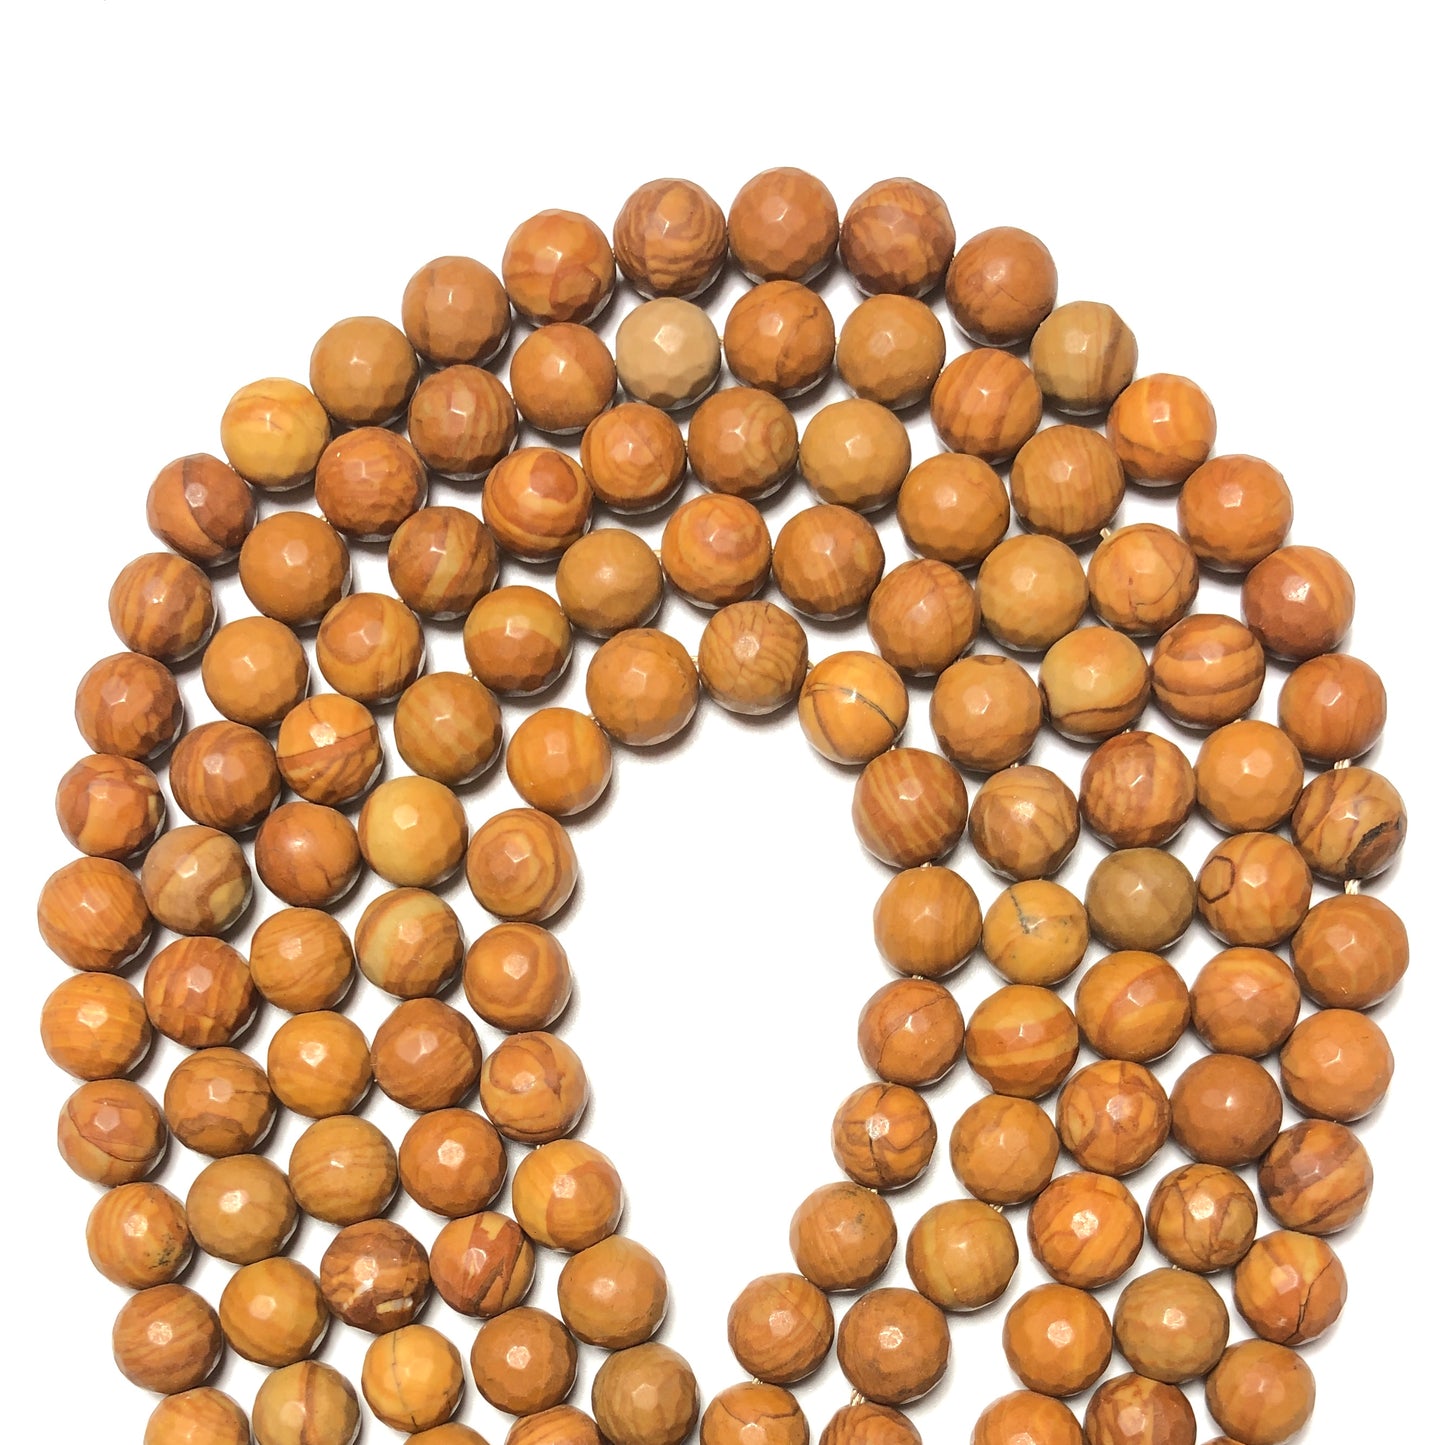 2 Strands/lot 10mm Wooden Jasper Faceted Stone Beads Stone Beads Jasper Beads New Beads Arrivals Charms Beads Beyond